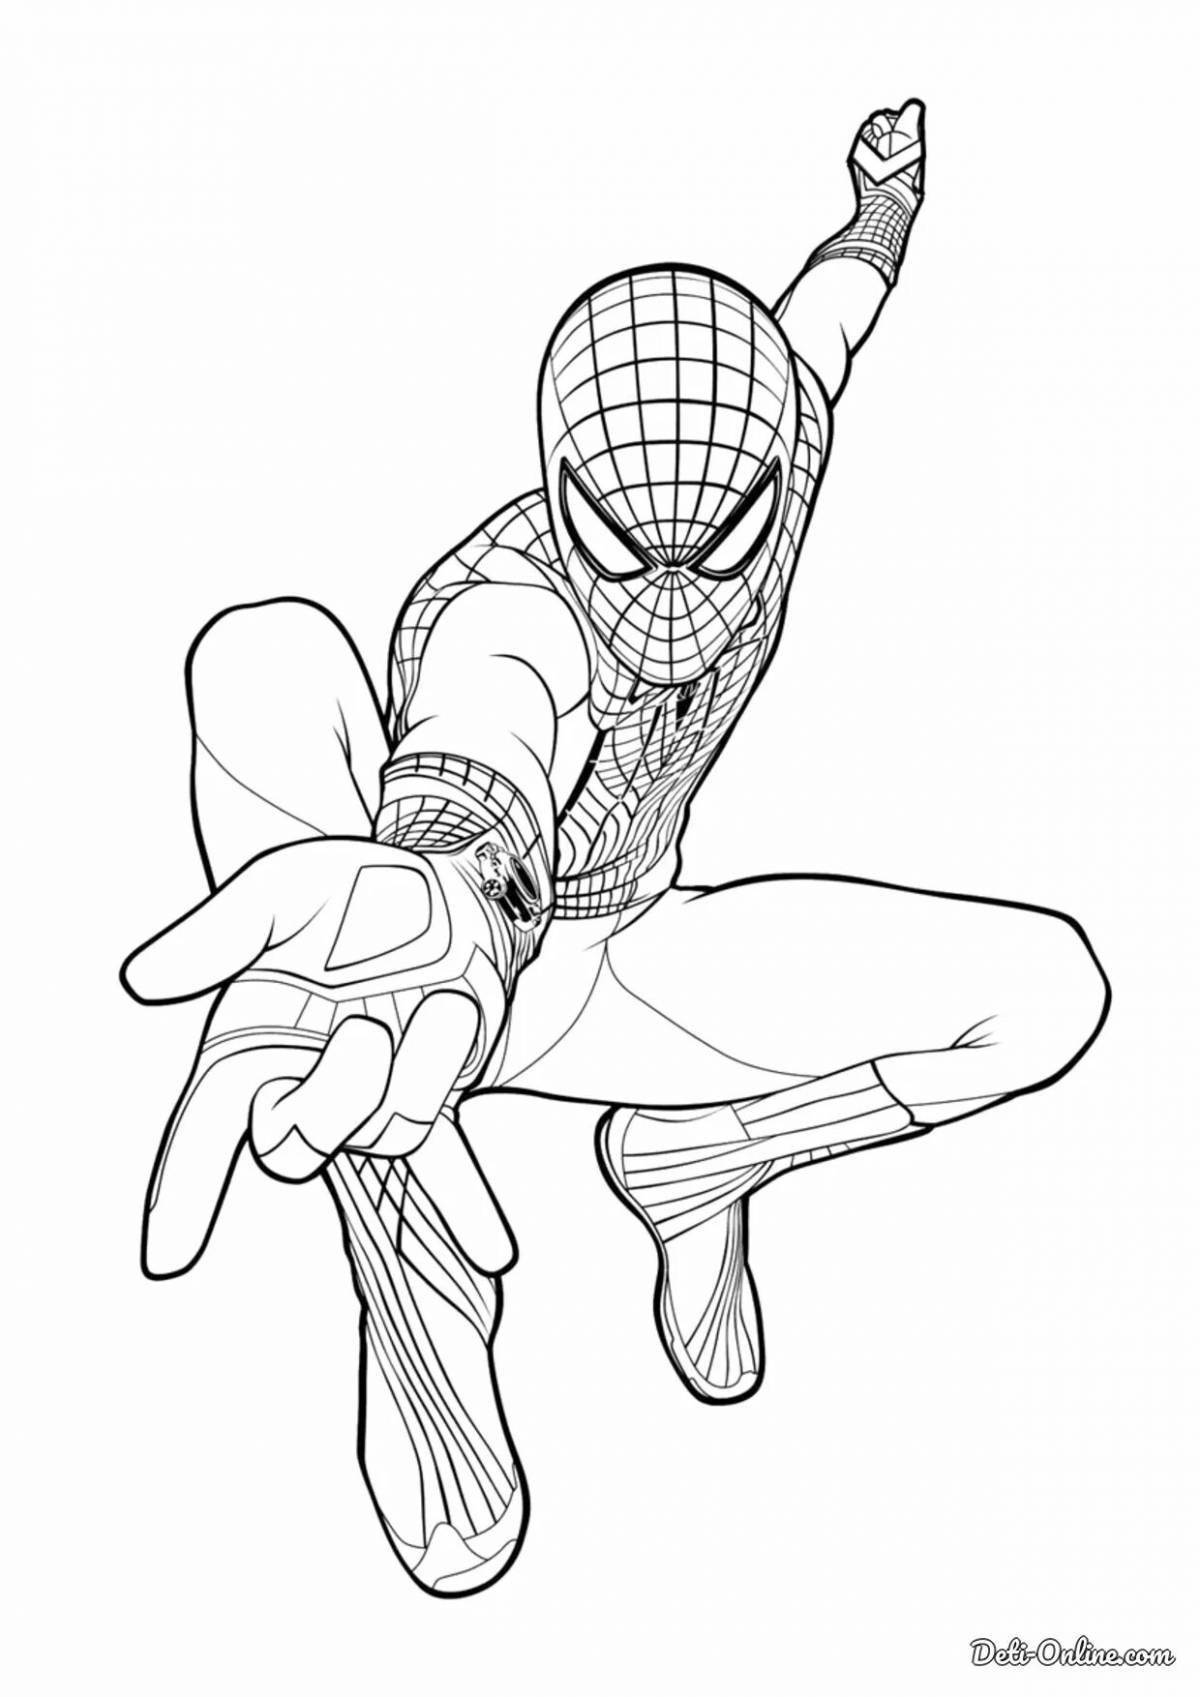 Detailed spiderman coloring book